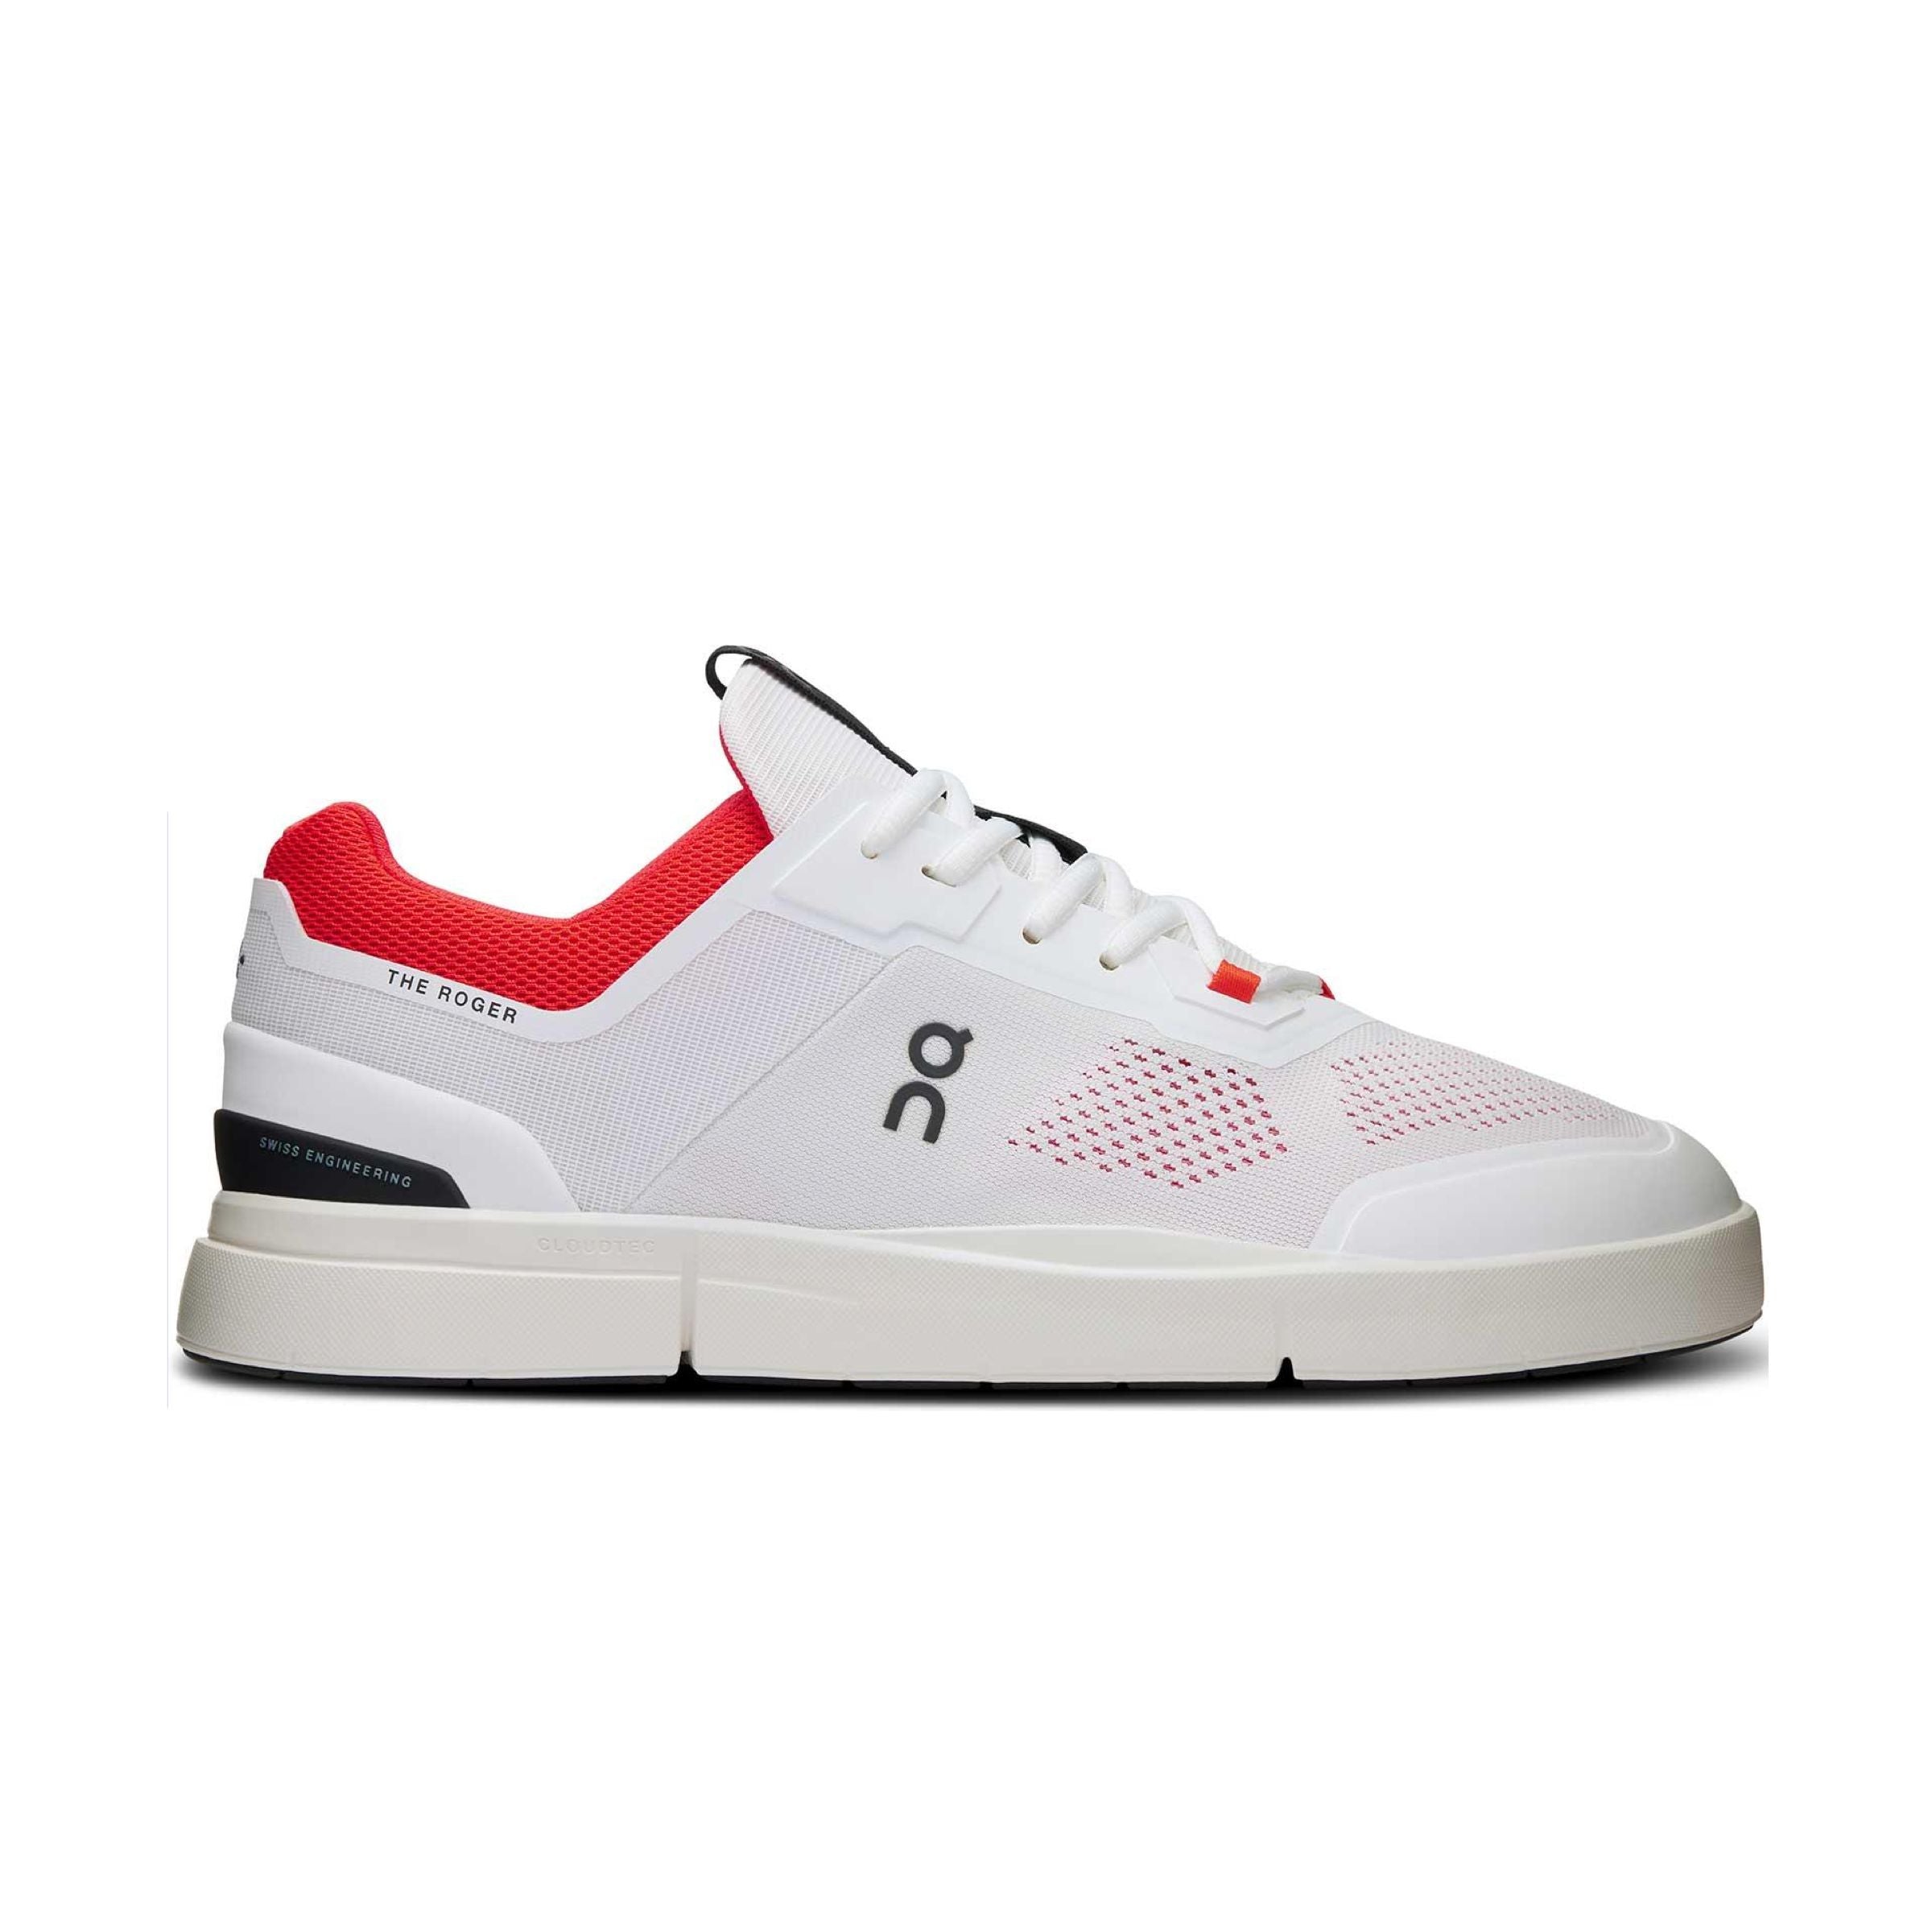 Men's The Roger Spin Shoes Undyed/Spice 